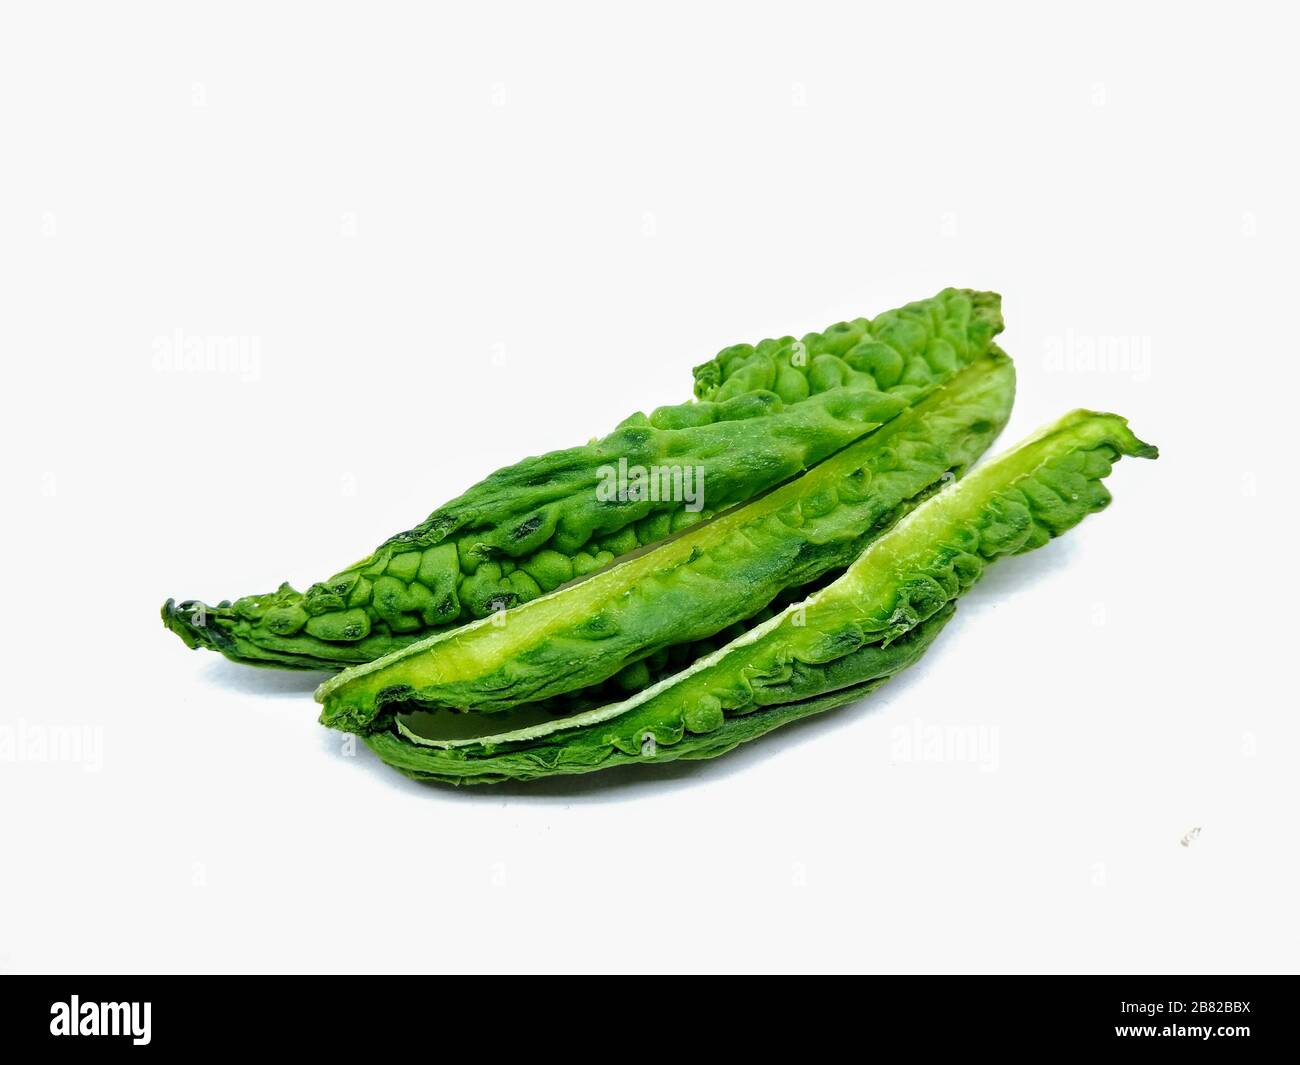 Bitter gourd plant Cut Out Stock Images & Pictures - Alamy